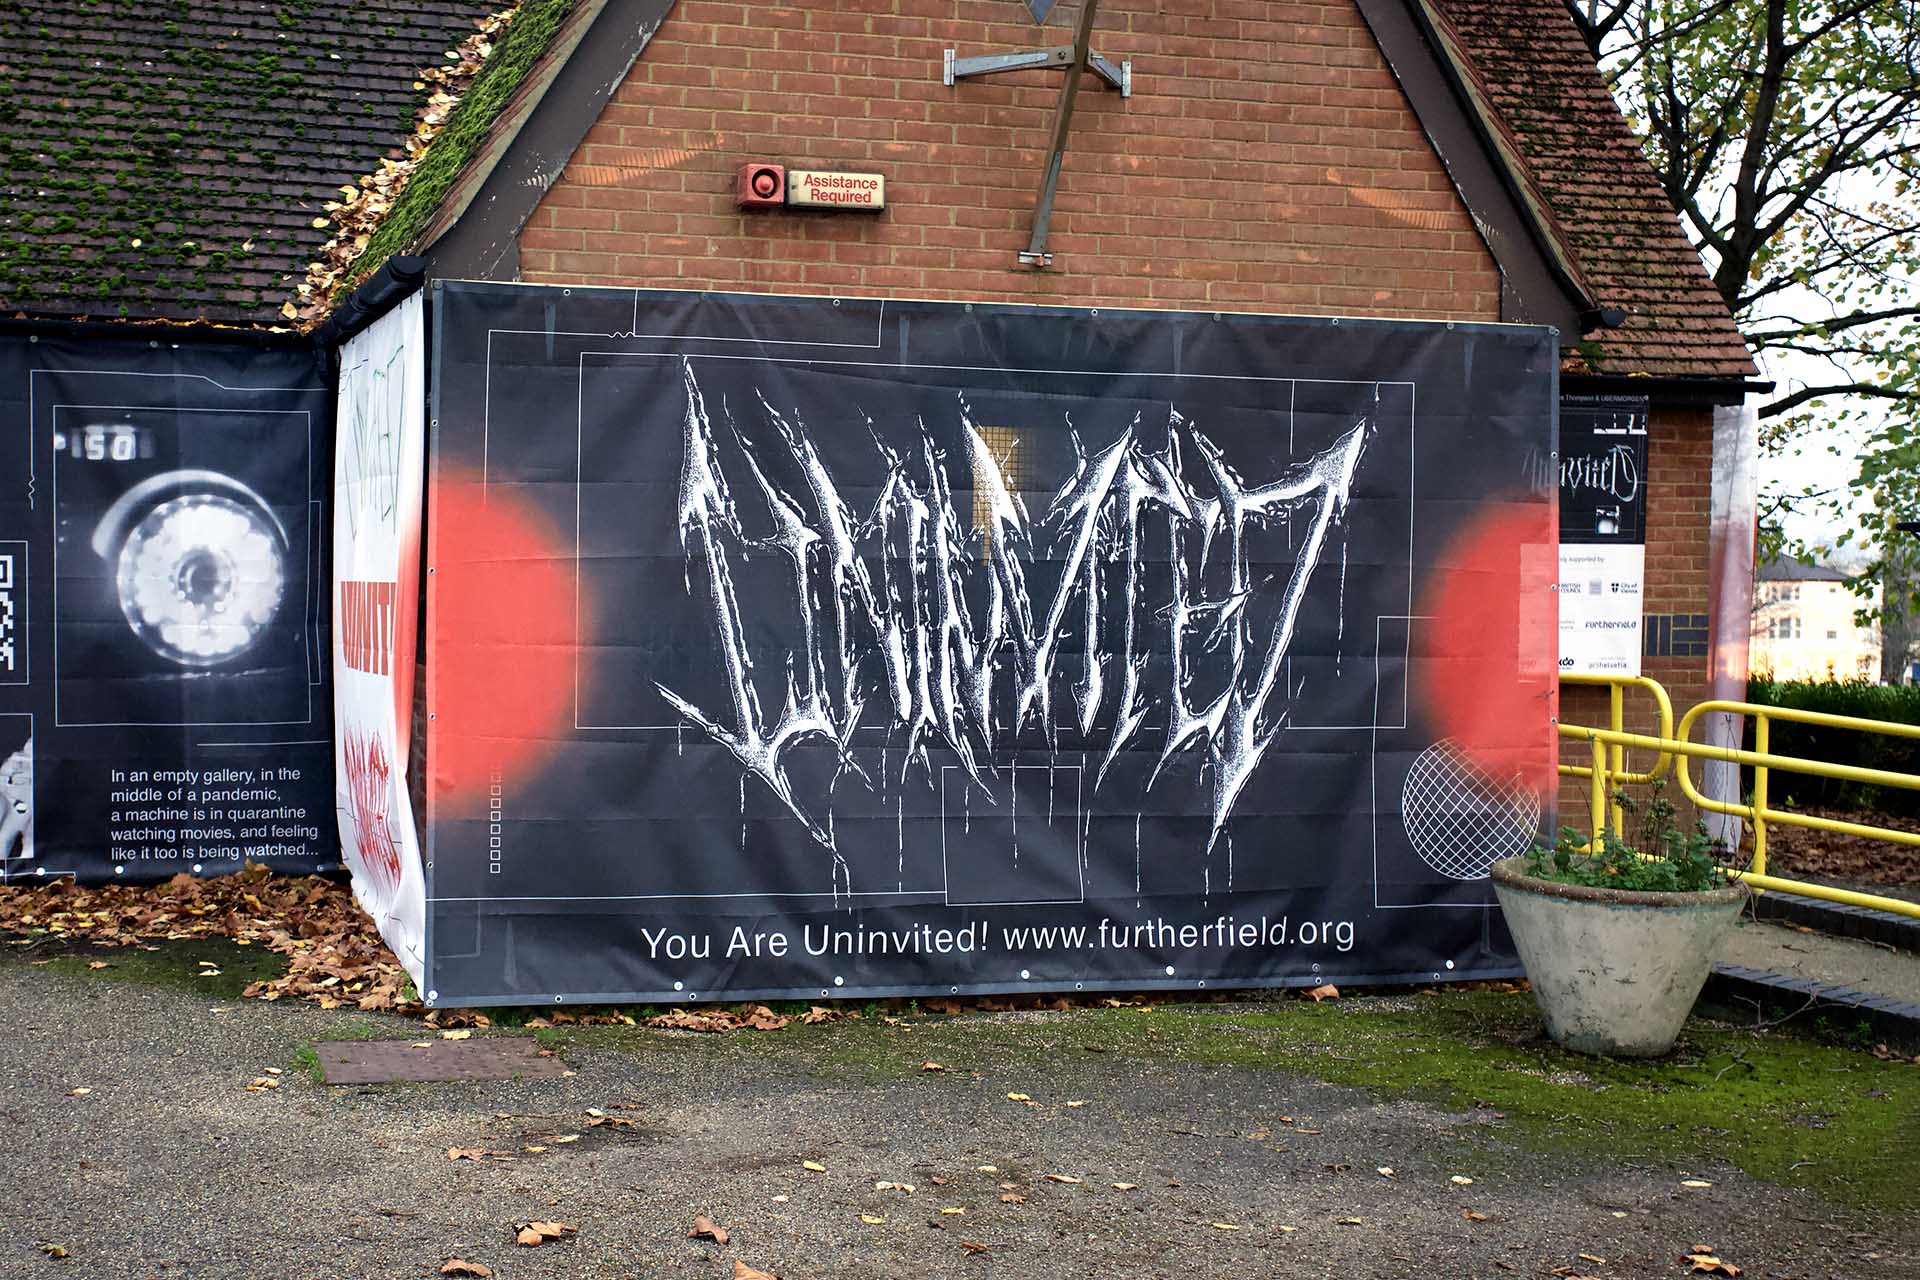 alt: A large banner on the side of Futher Field Gallery with the word Univited written on it in spikey metal type.